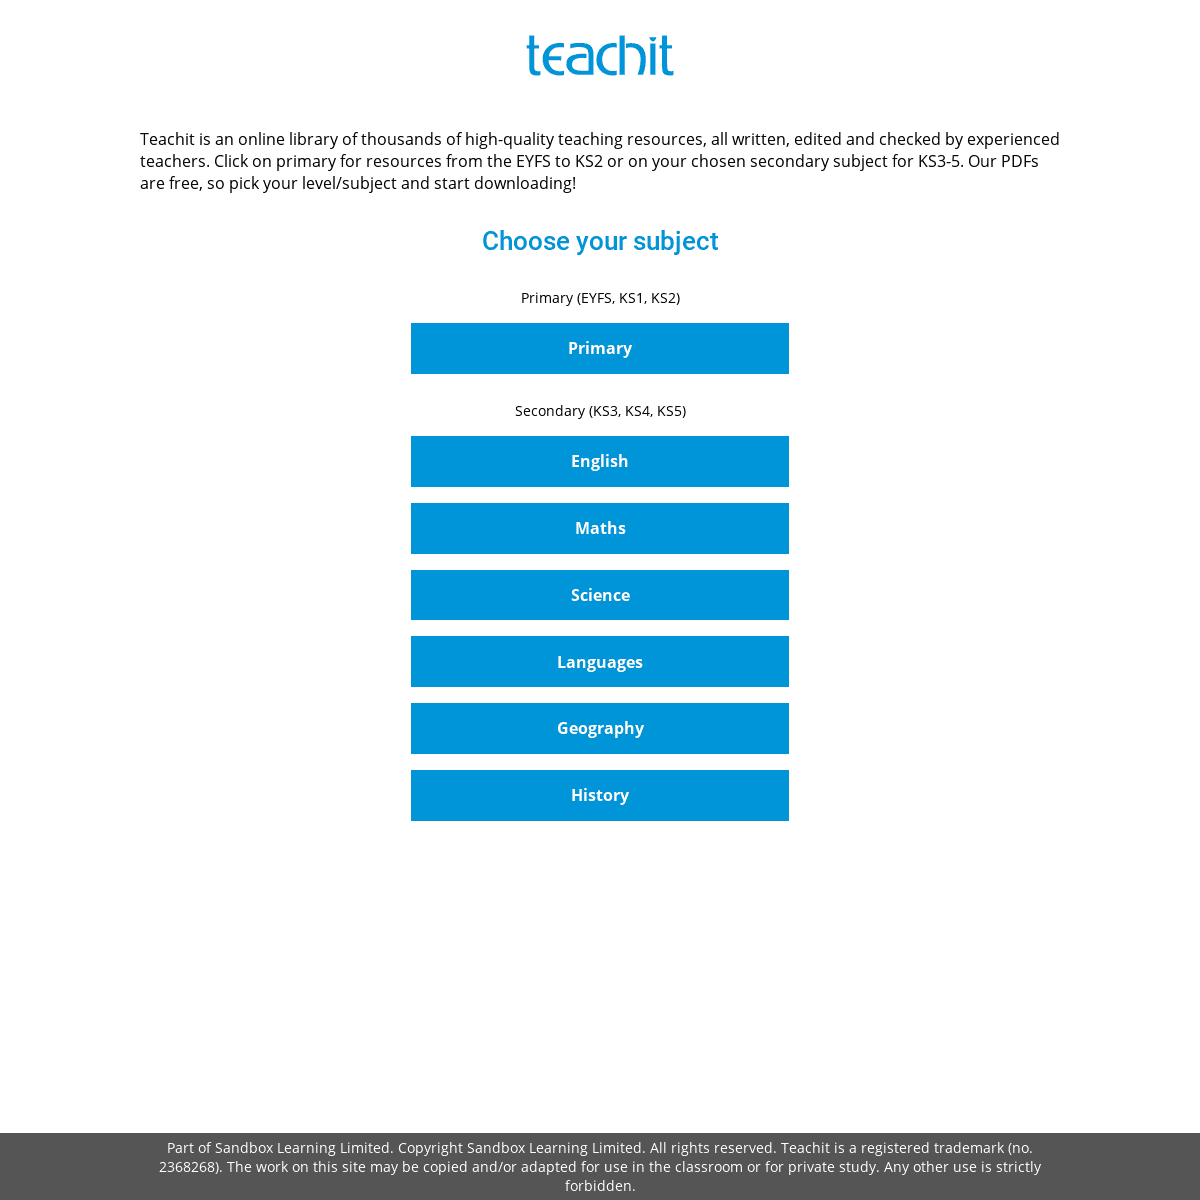 A complete backup of https://teachit.co.uk